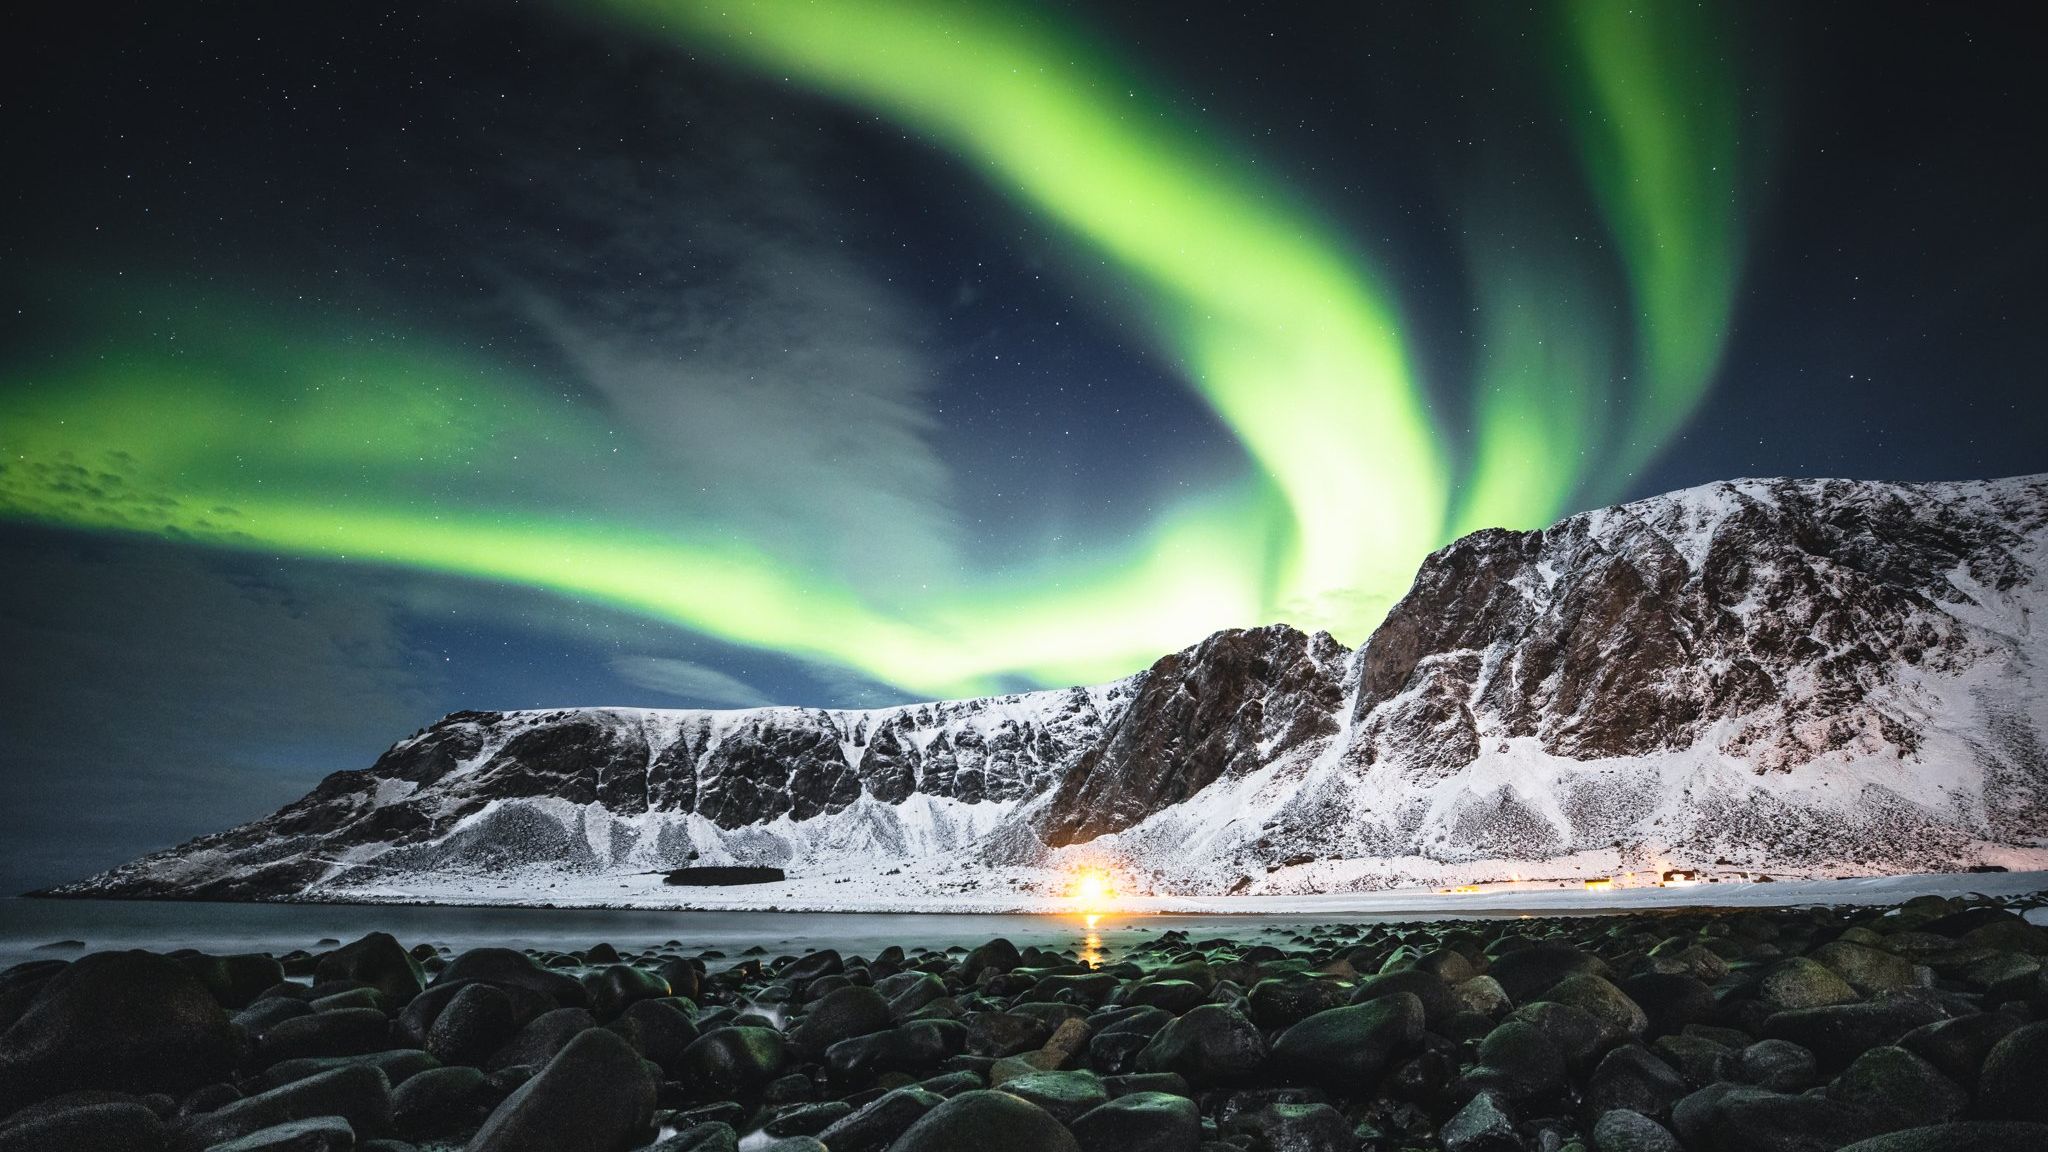 The Northern lights shine brightly across the mountains and the beach below. 